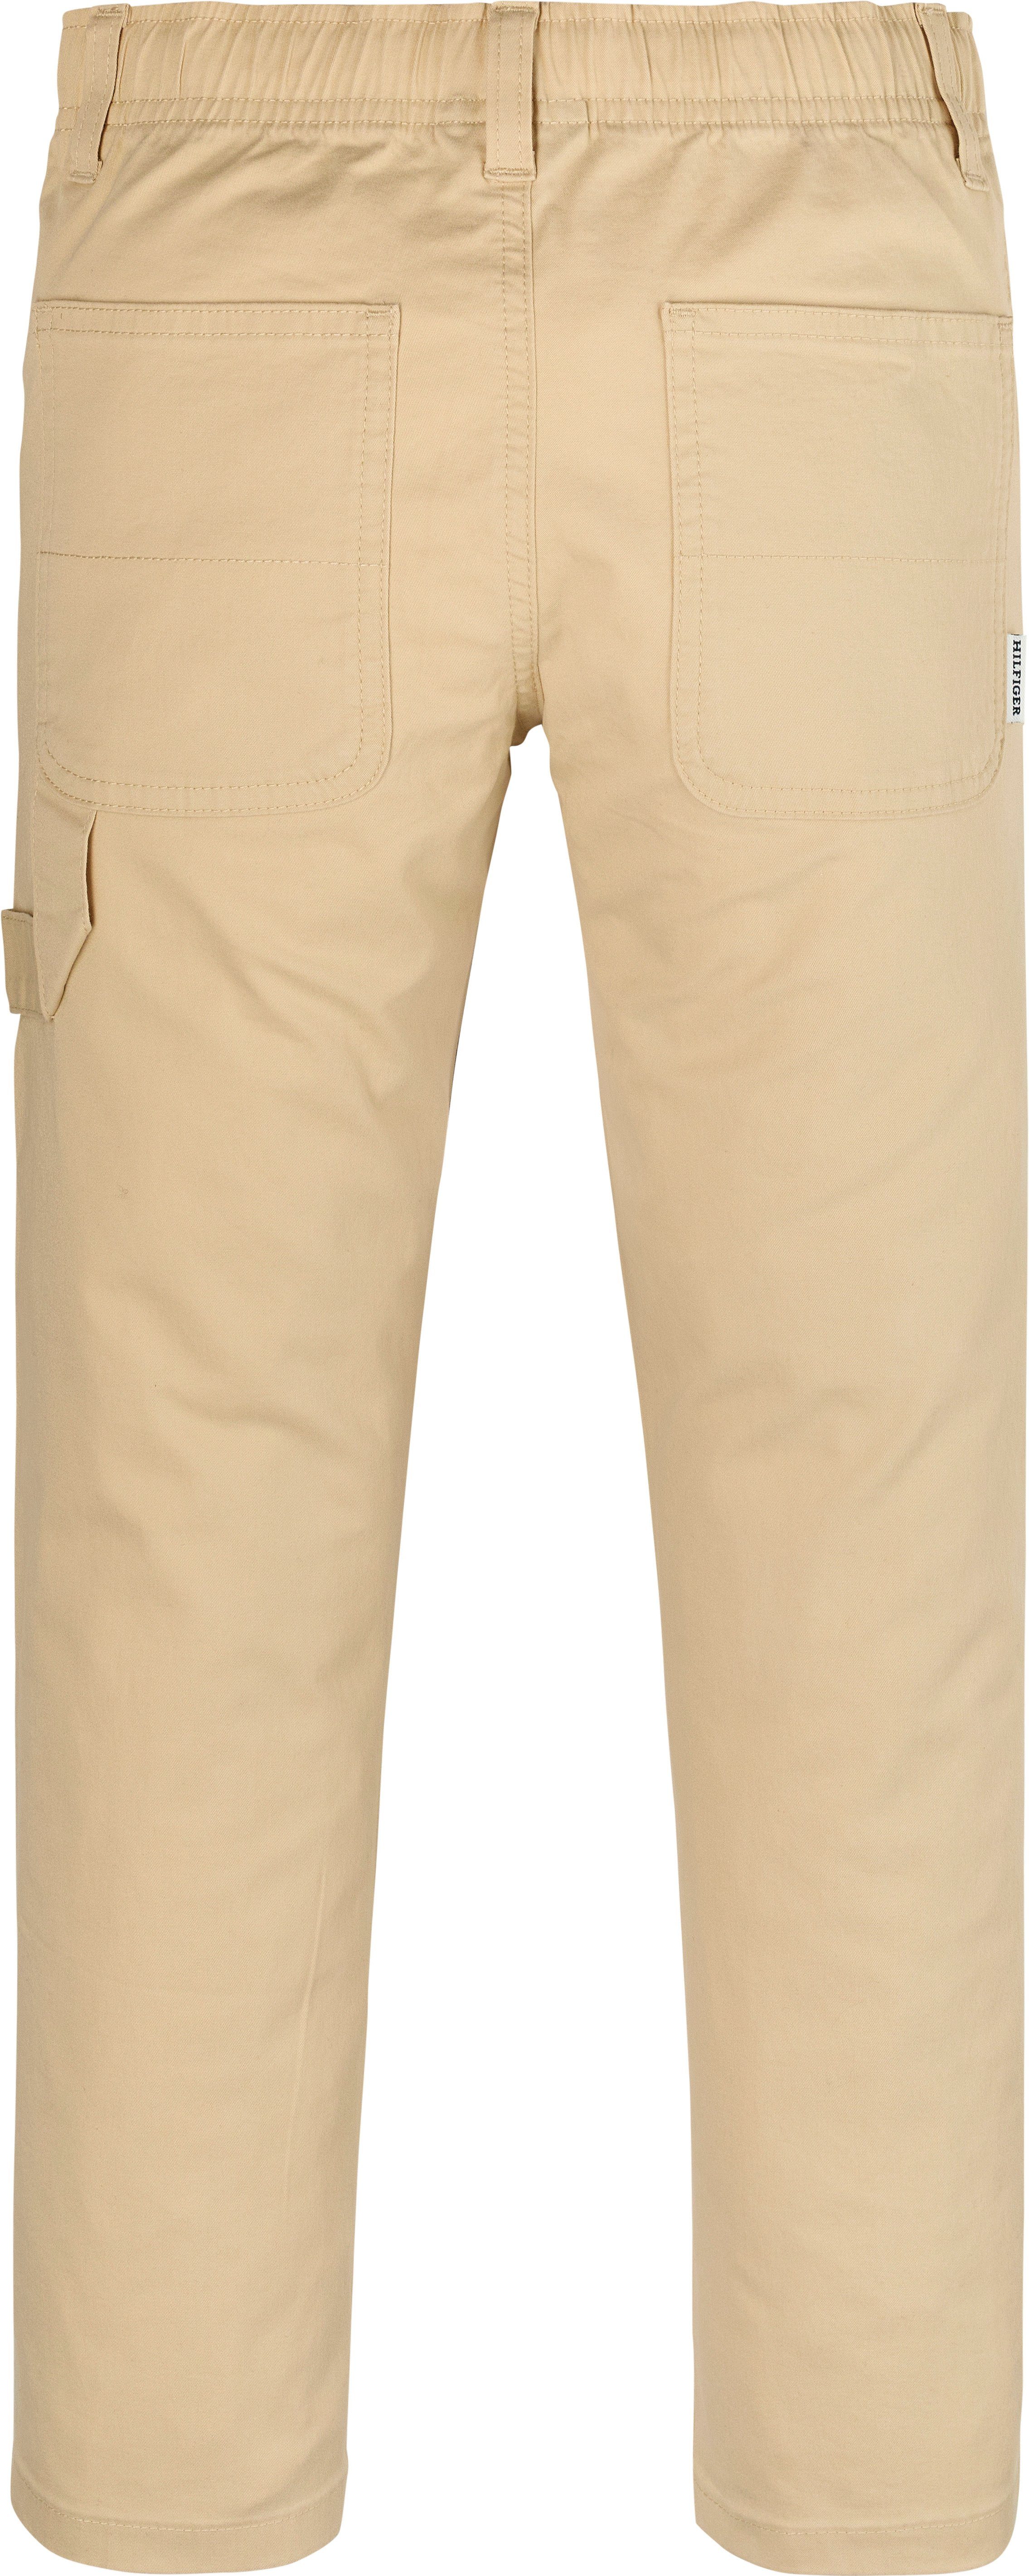 Tommy Hilfiger Webhose SKATER mit ON Logostickerei PANTS WOVEN PULL